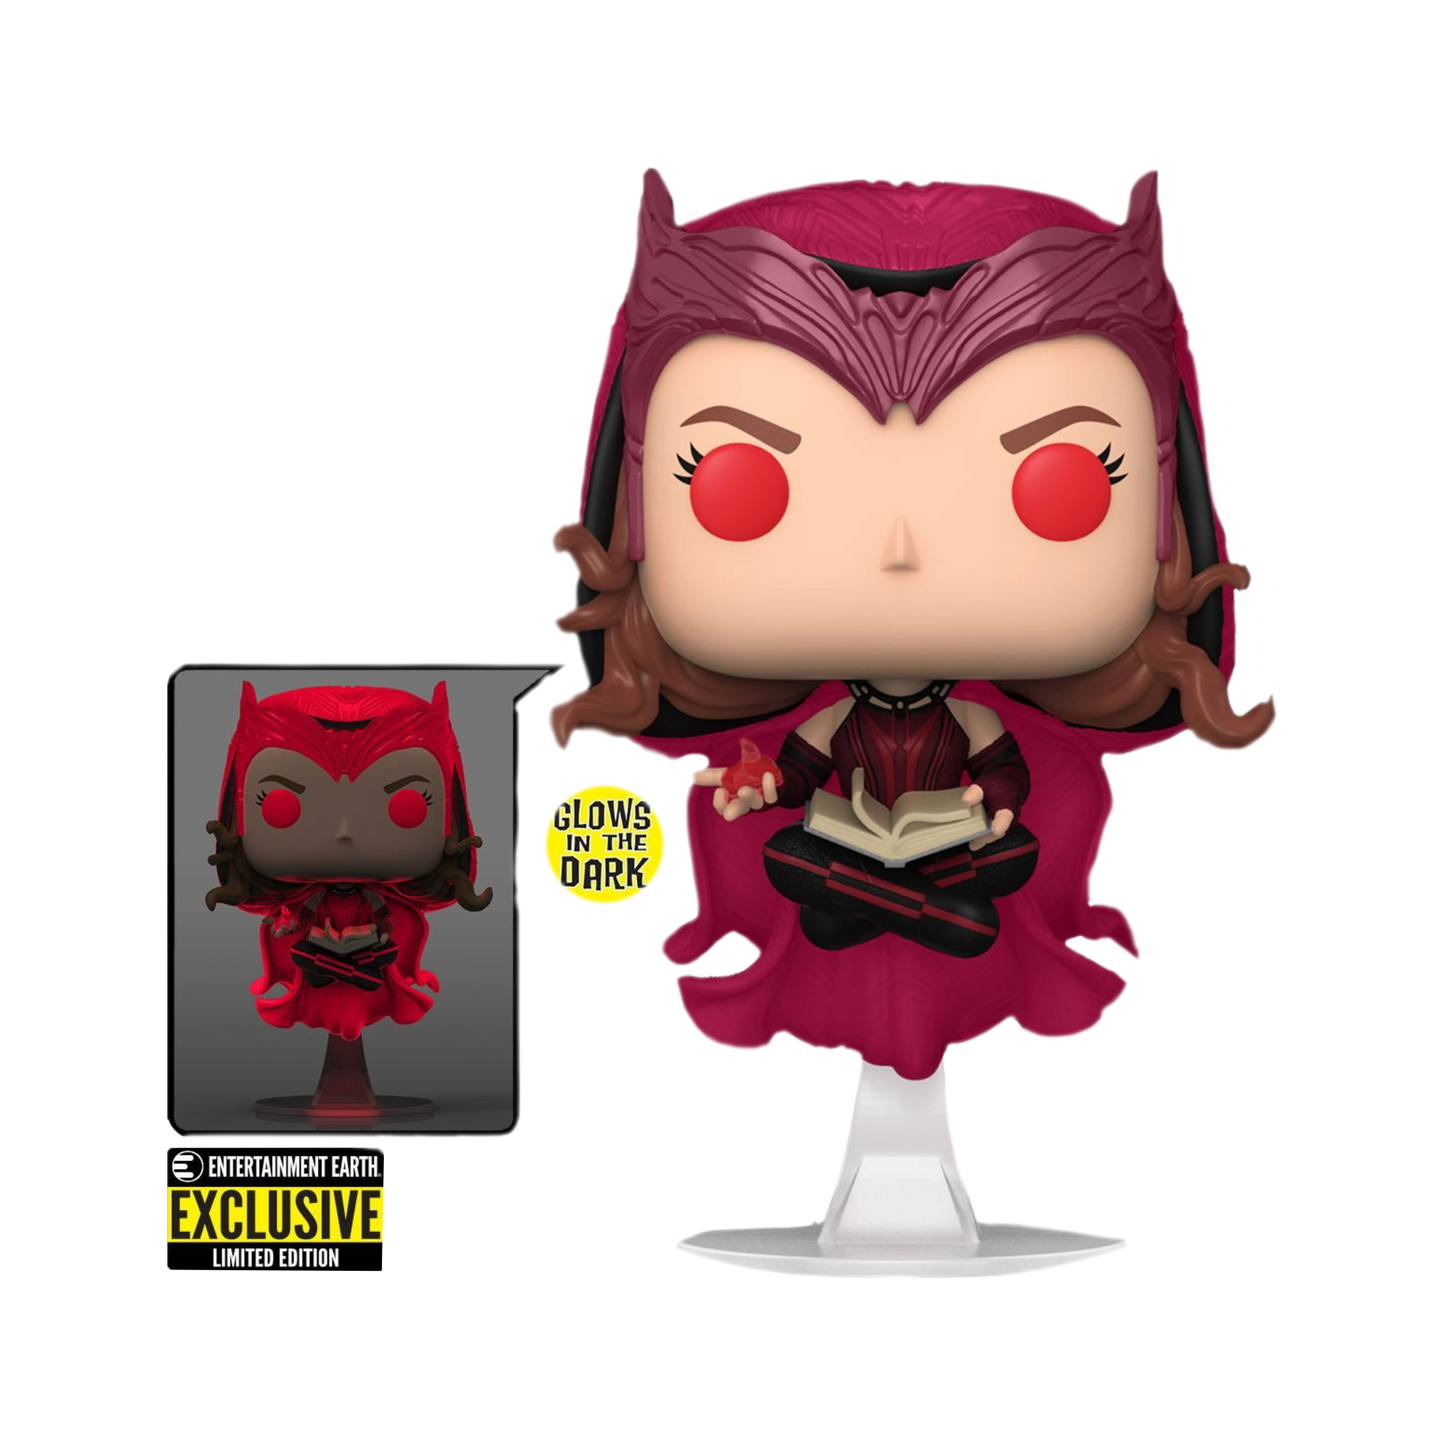 WandaVision Scarlet Witch Glow-in-the-Dark Pop! - Entertainment Earth Exclusive